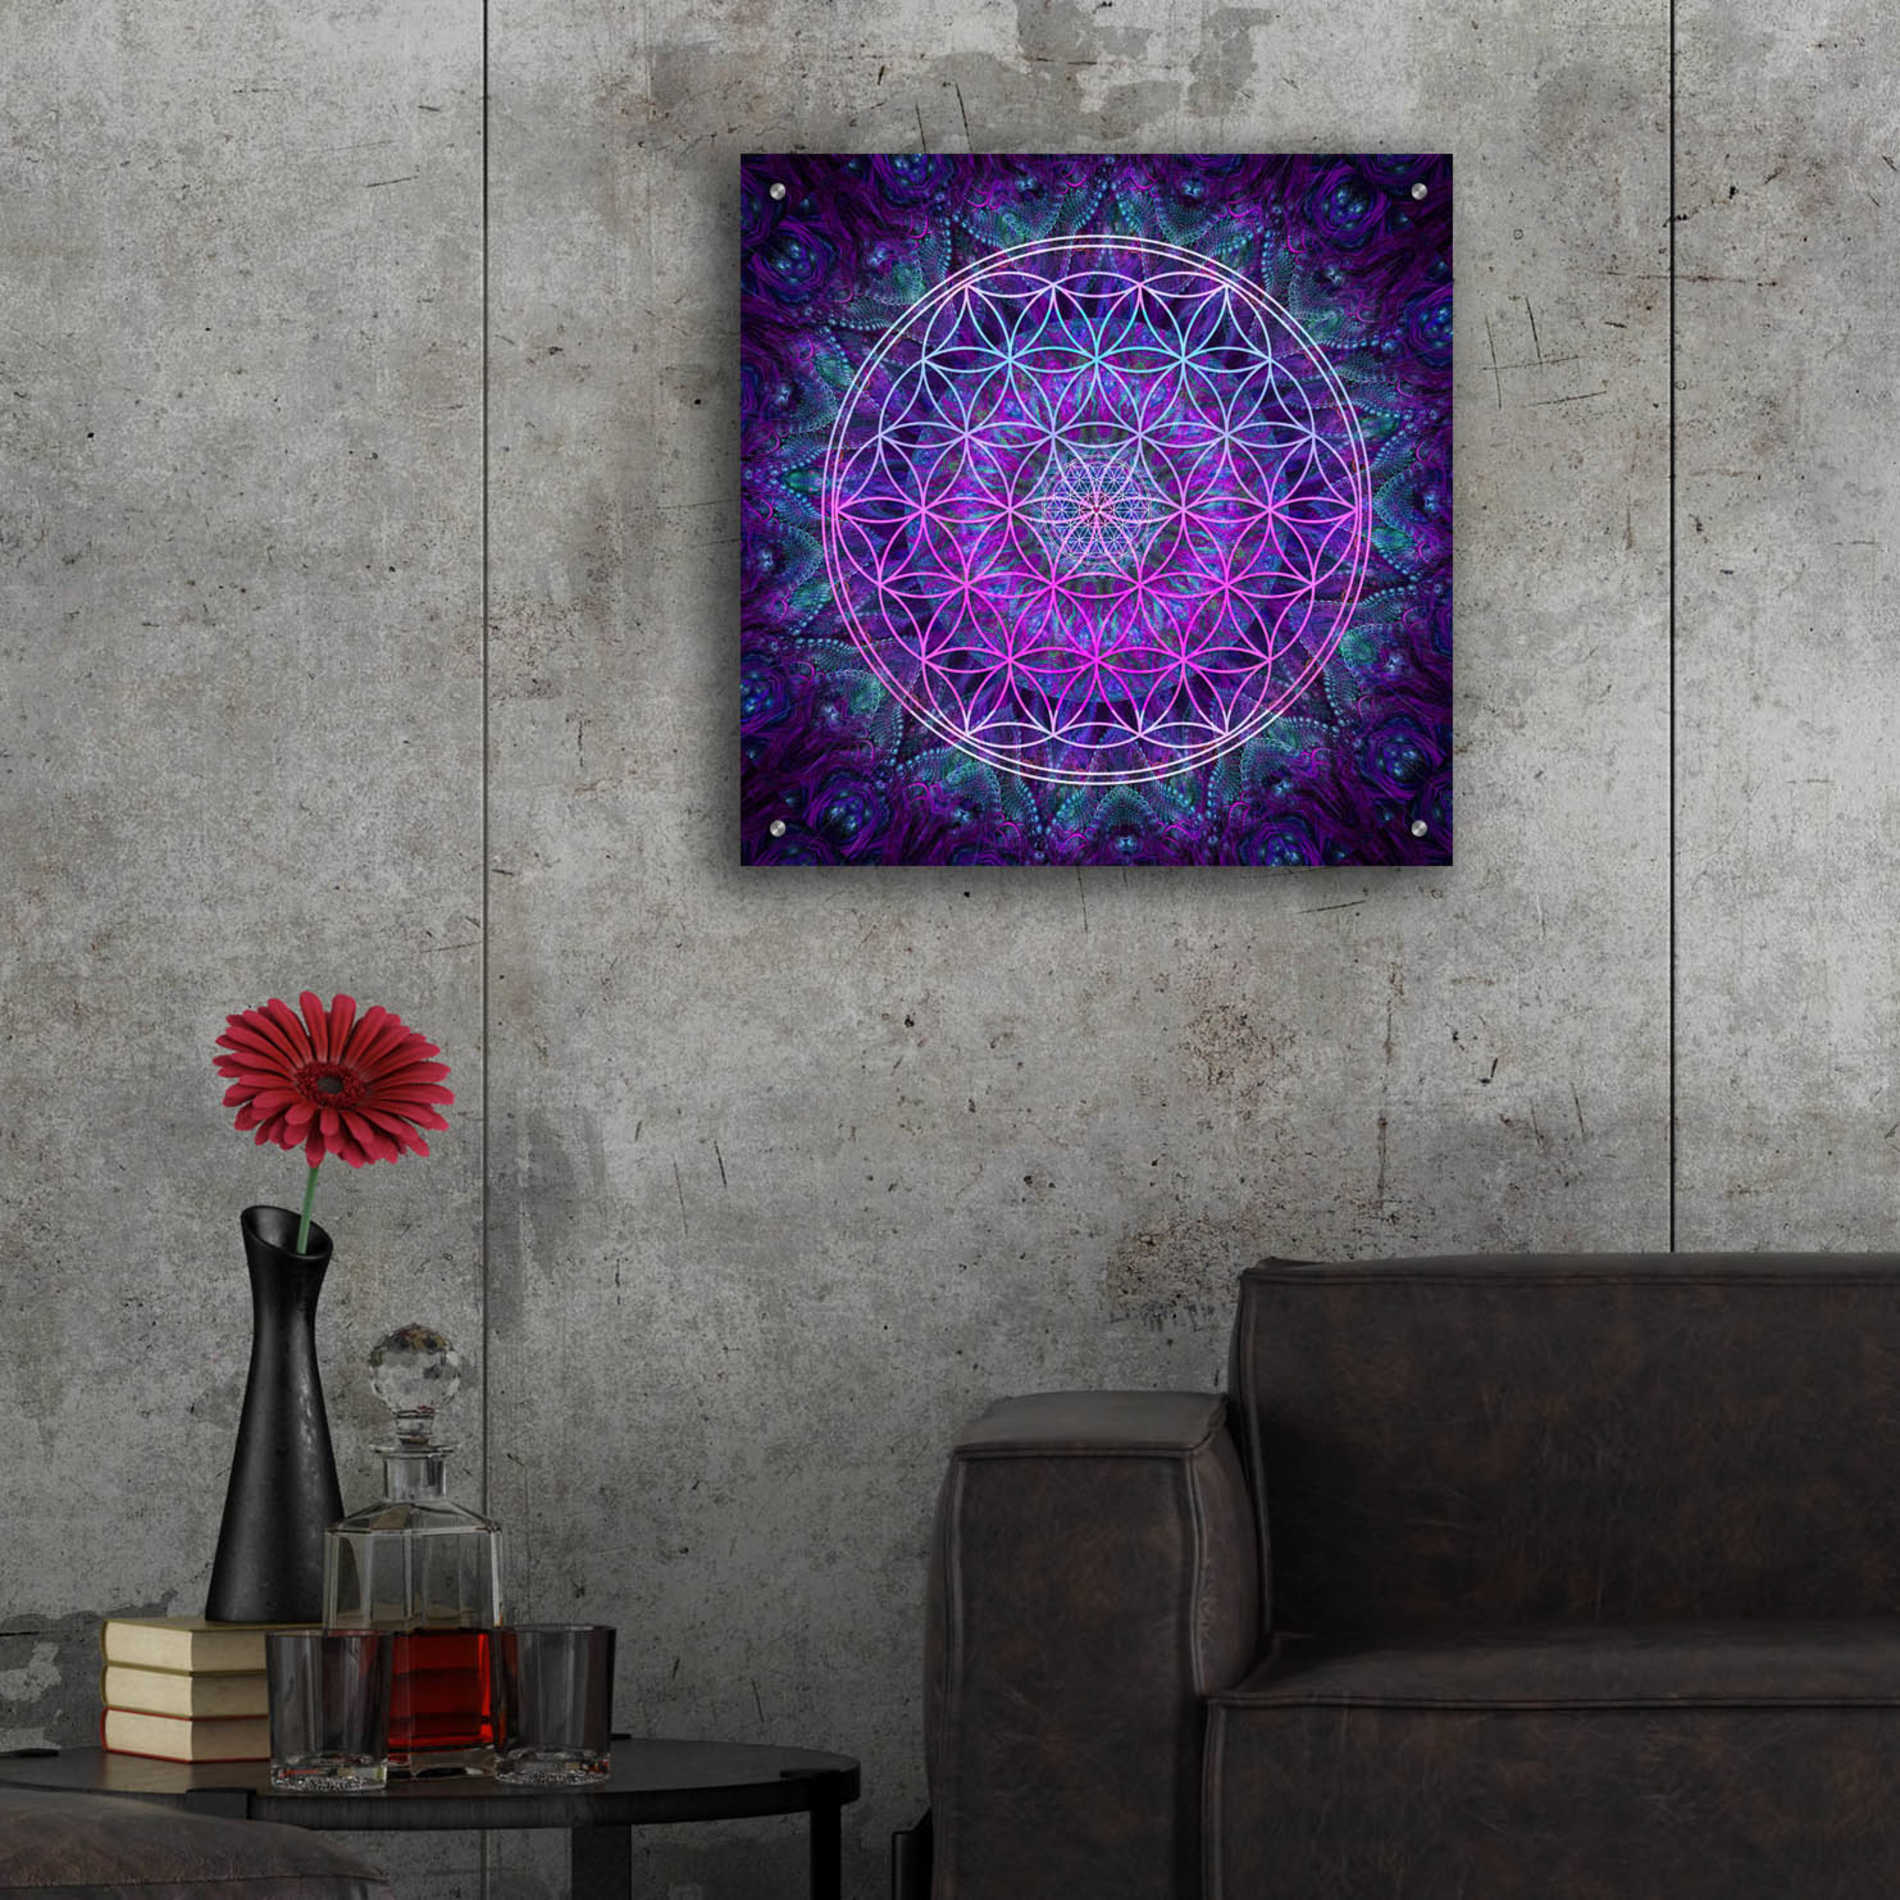 Epic Art 'Flower Of Life' by Cameron Gray Acrylic Glass Wall Art,24x24